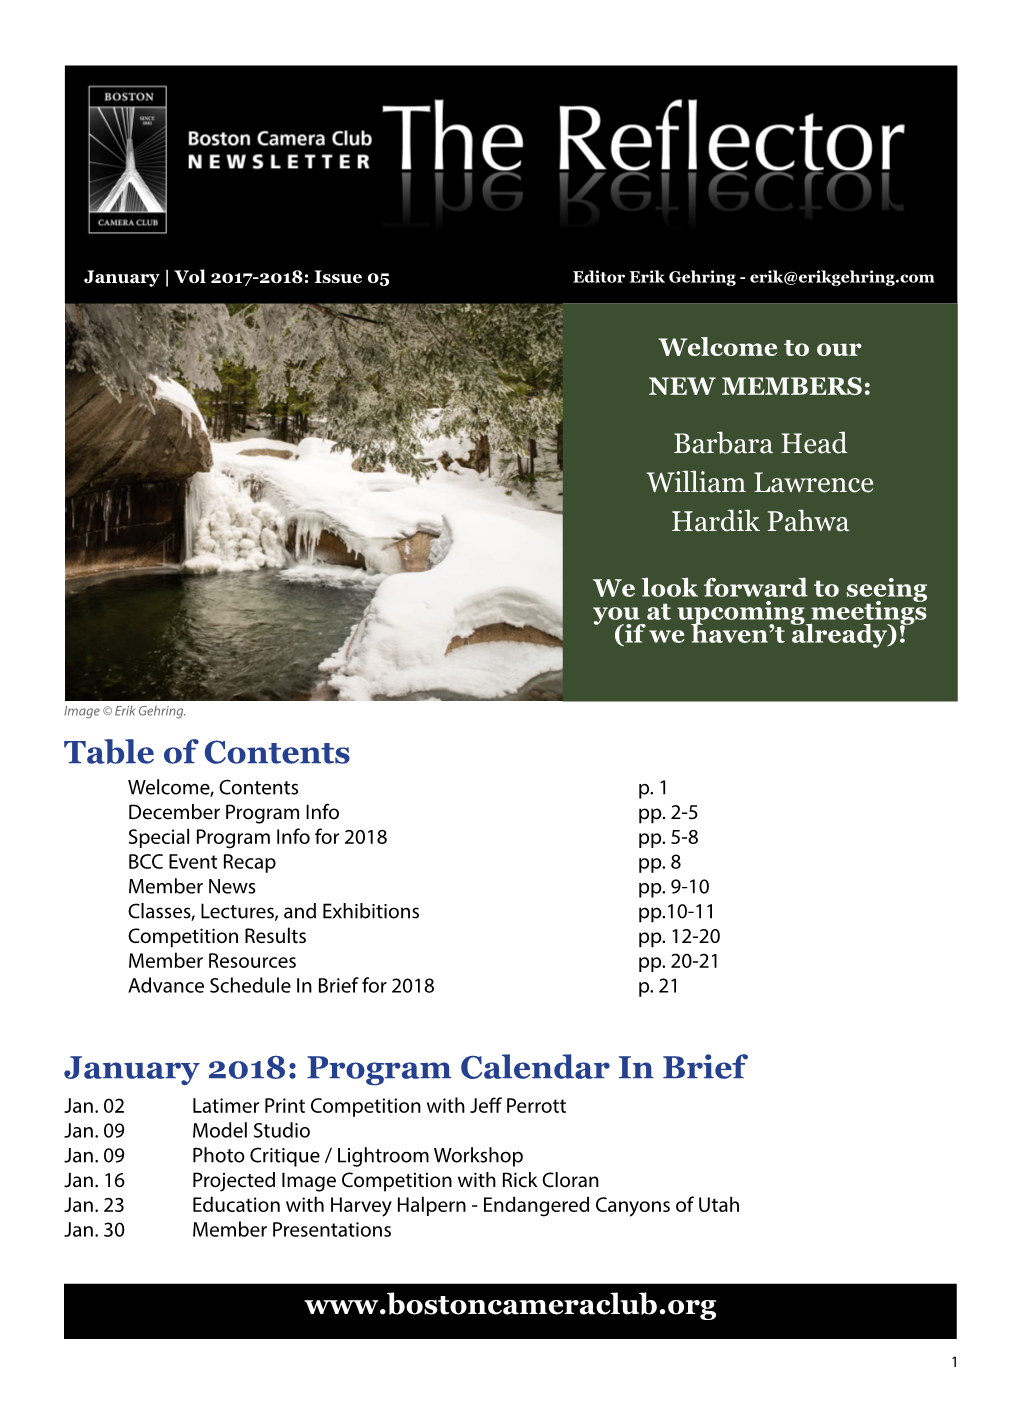 Table of Contents January 2018: Program